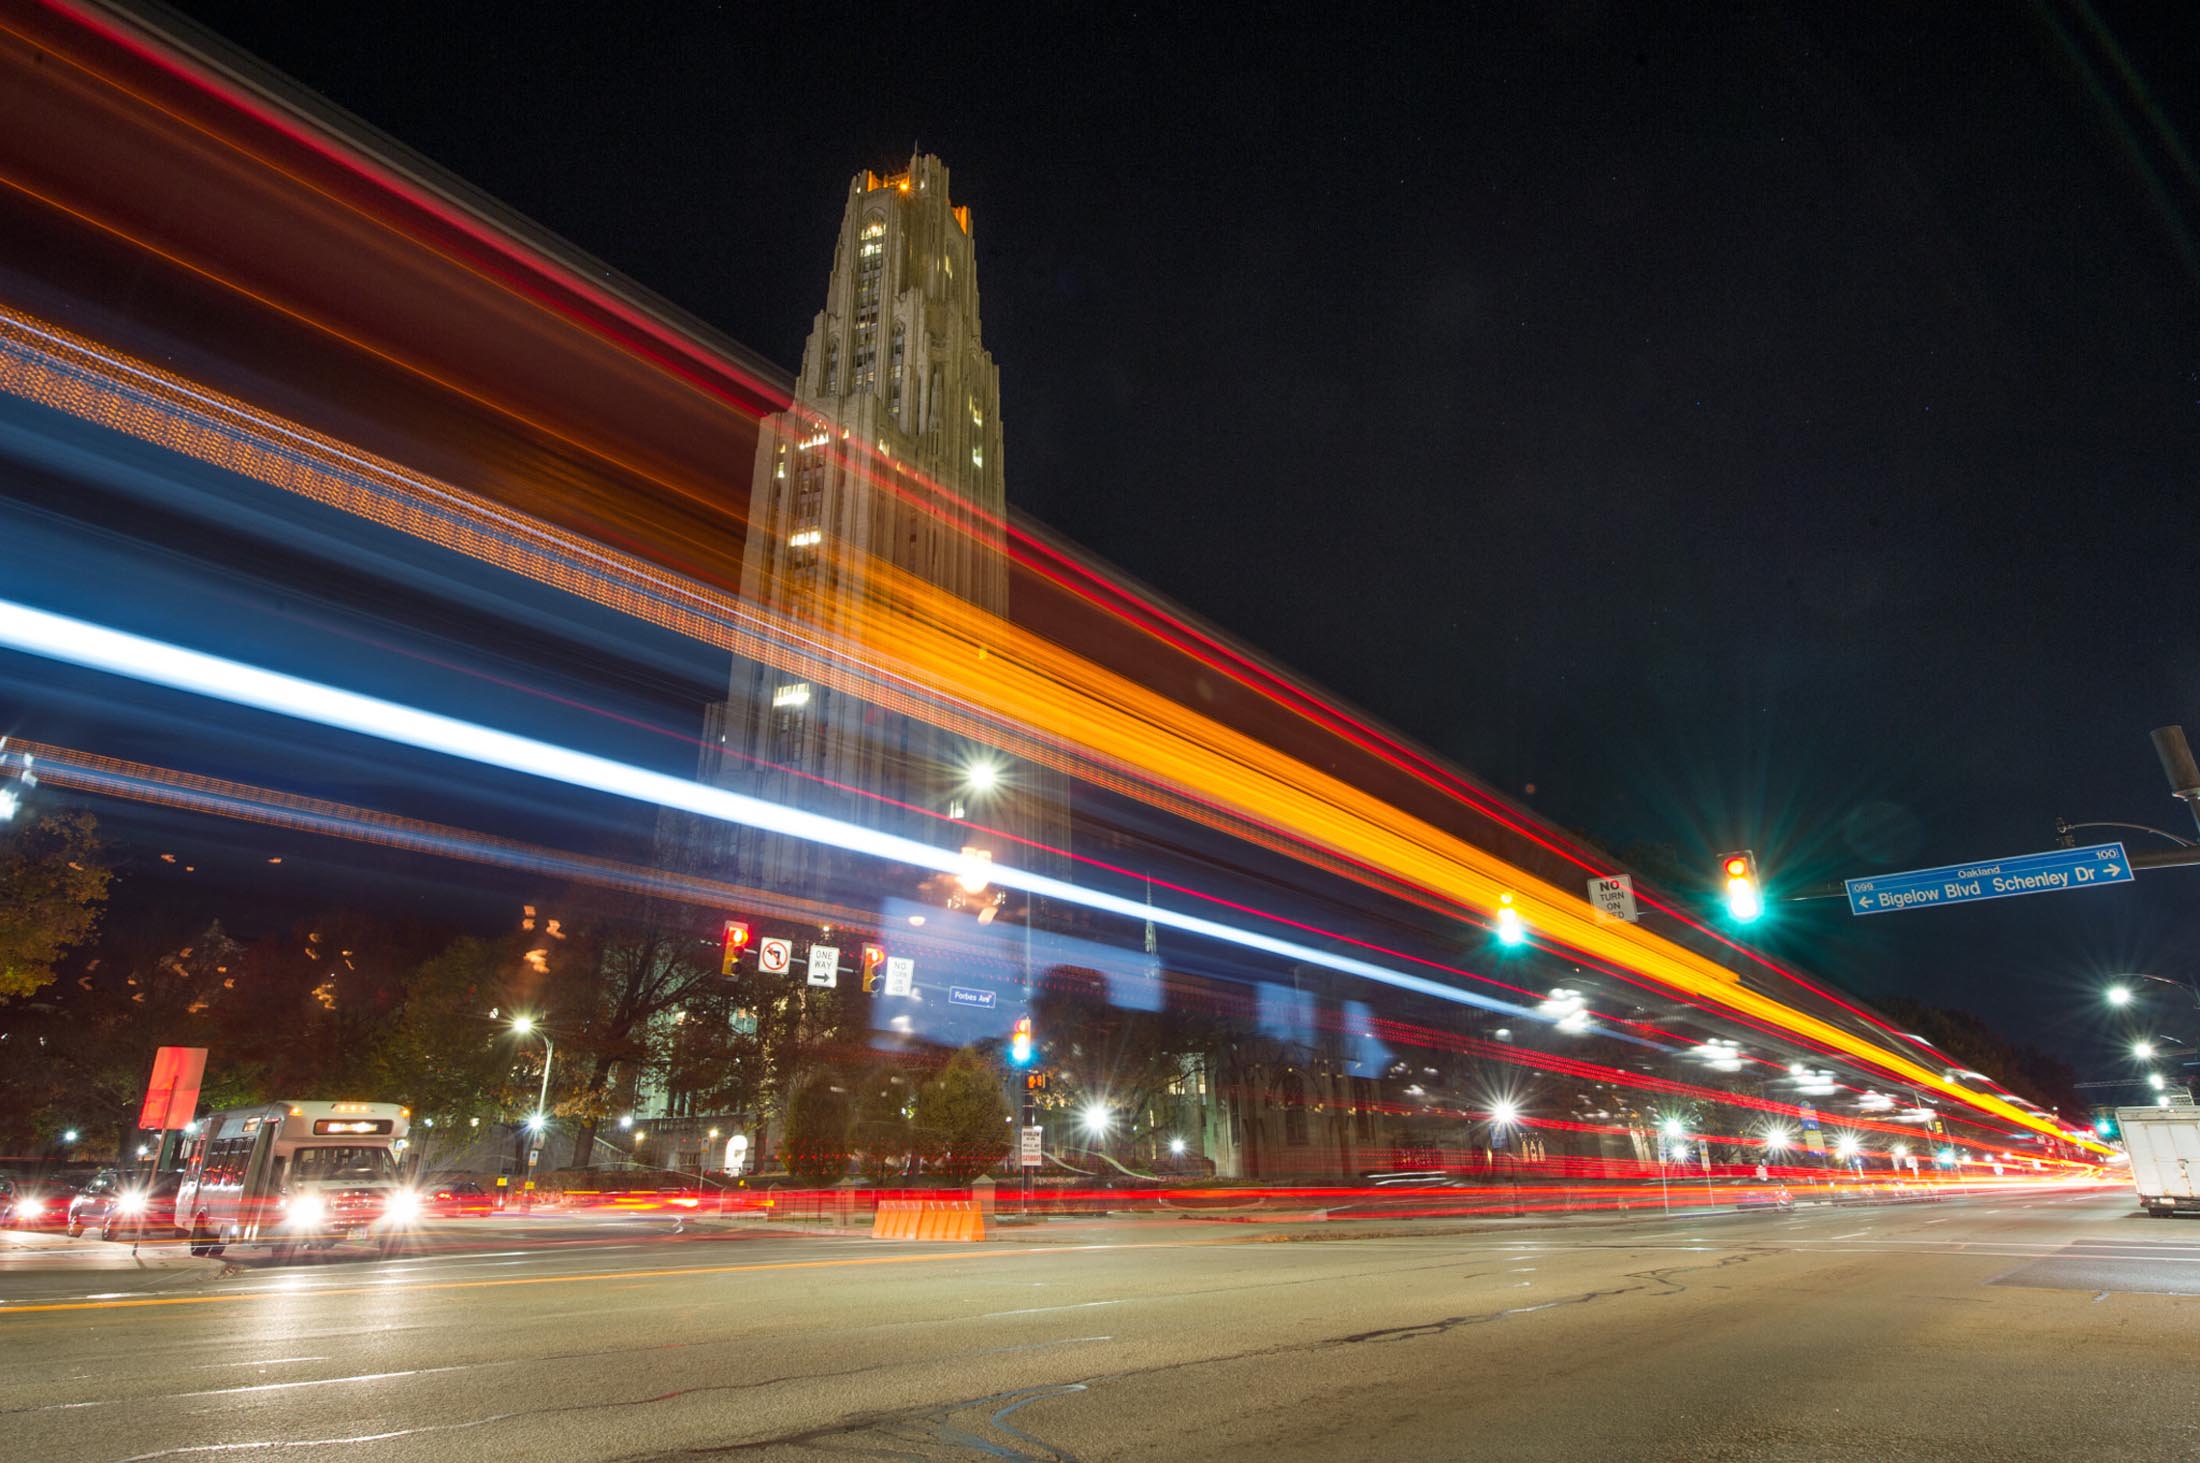  Time lapse photo of Bigelow at night with the Cathedral of Learning in the background